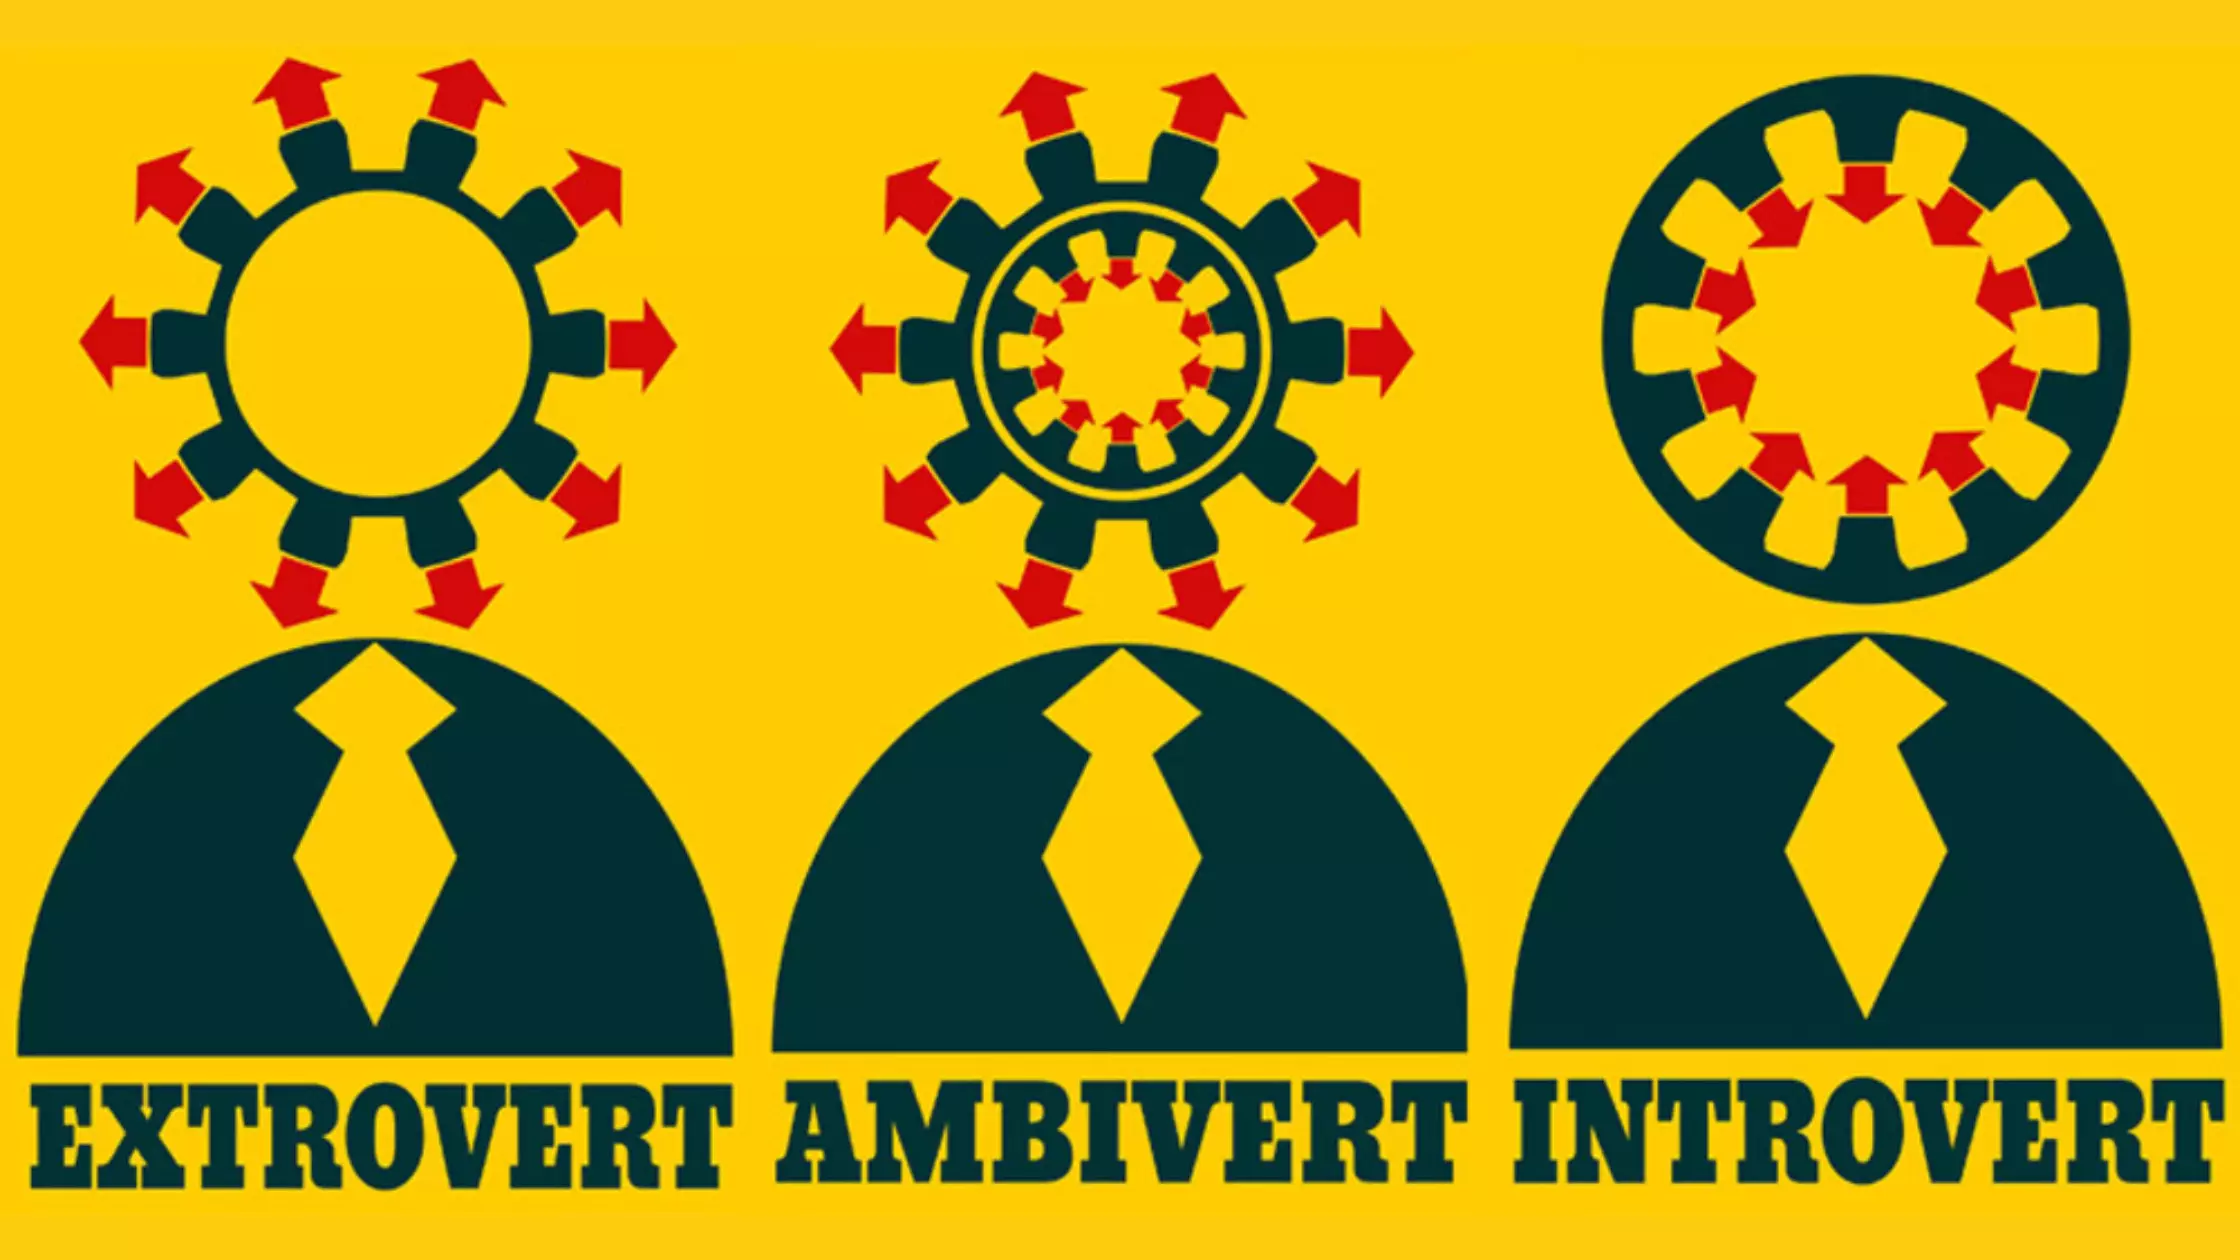 which is best introvert or extrovert or ambivert